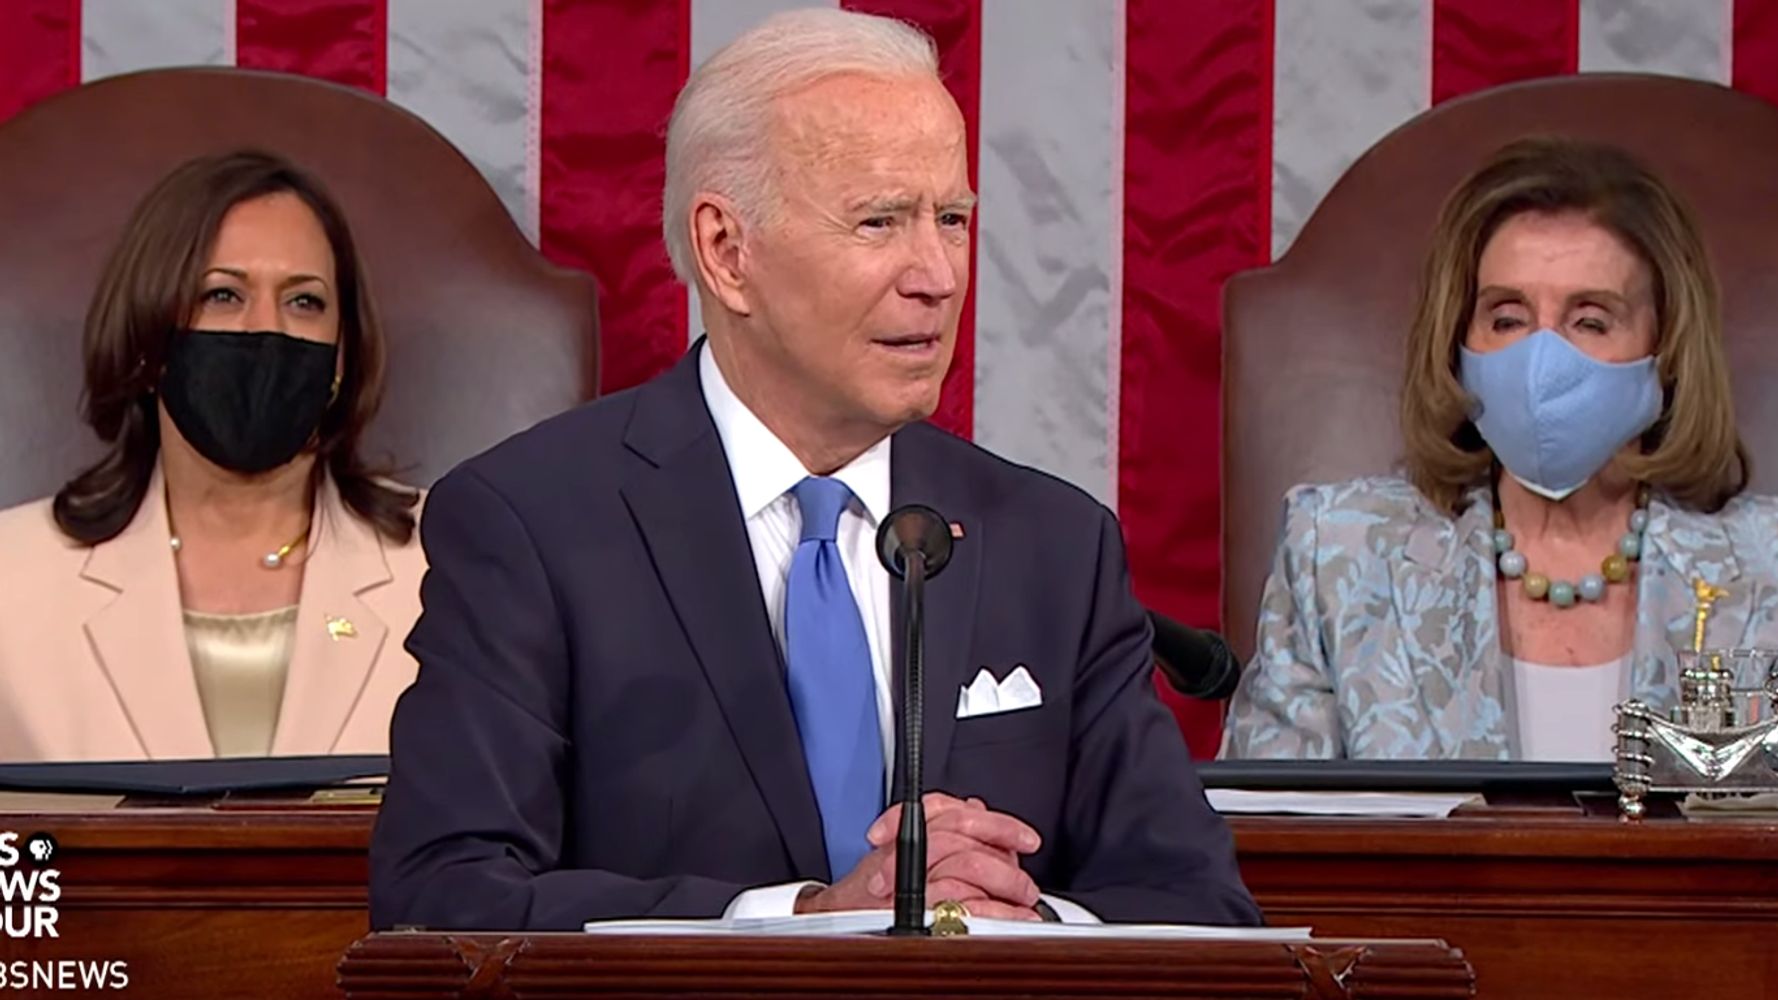 Joe Biden Calls For U.S. To 'Root Out Systemic Racism' In Speech To Congress